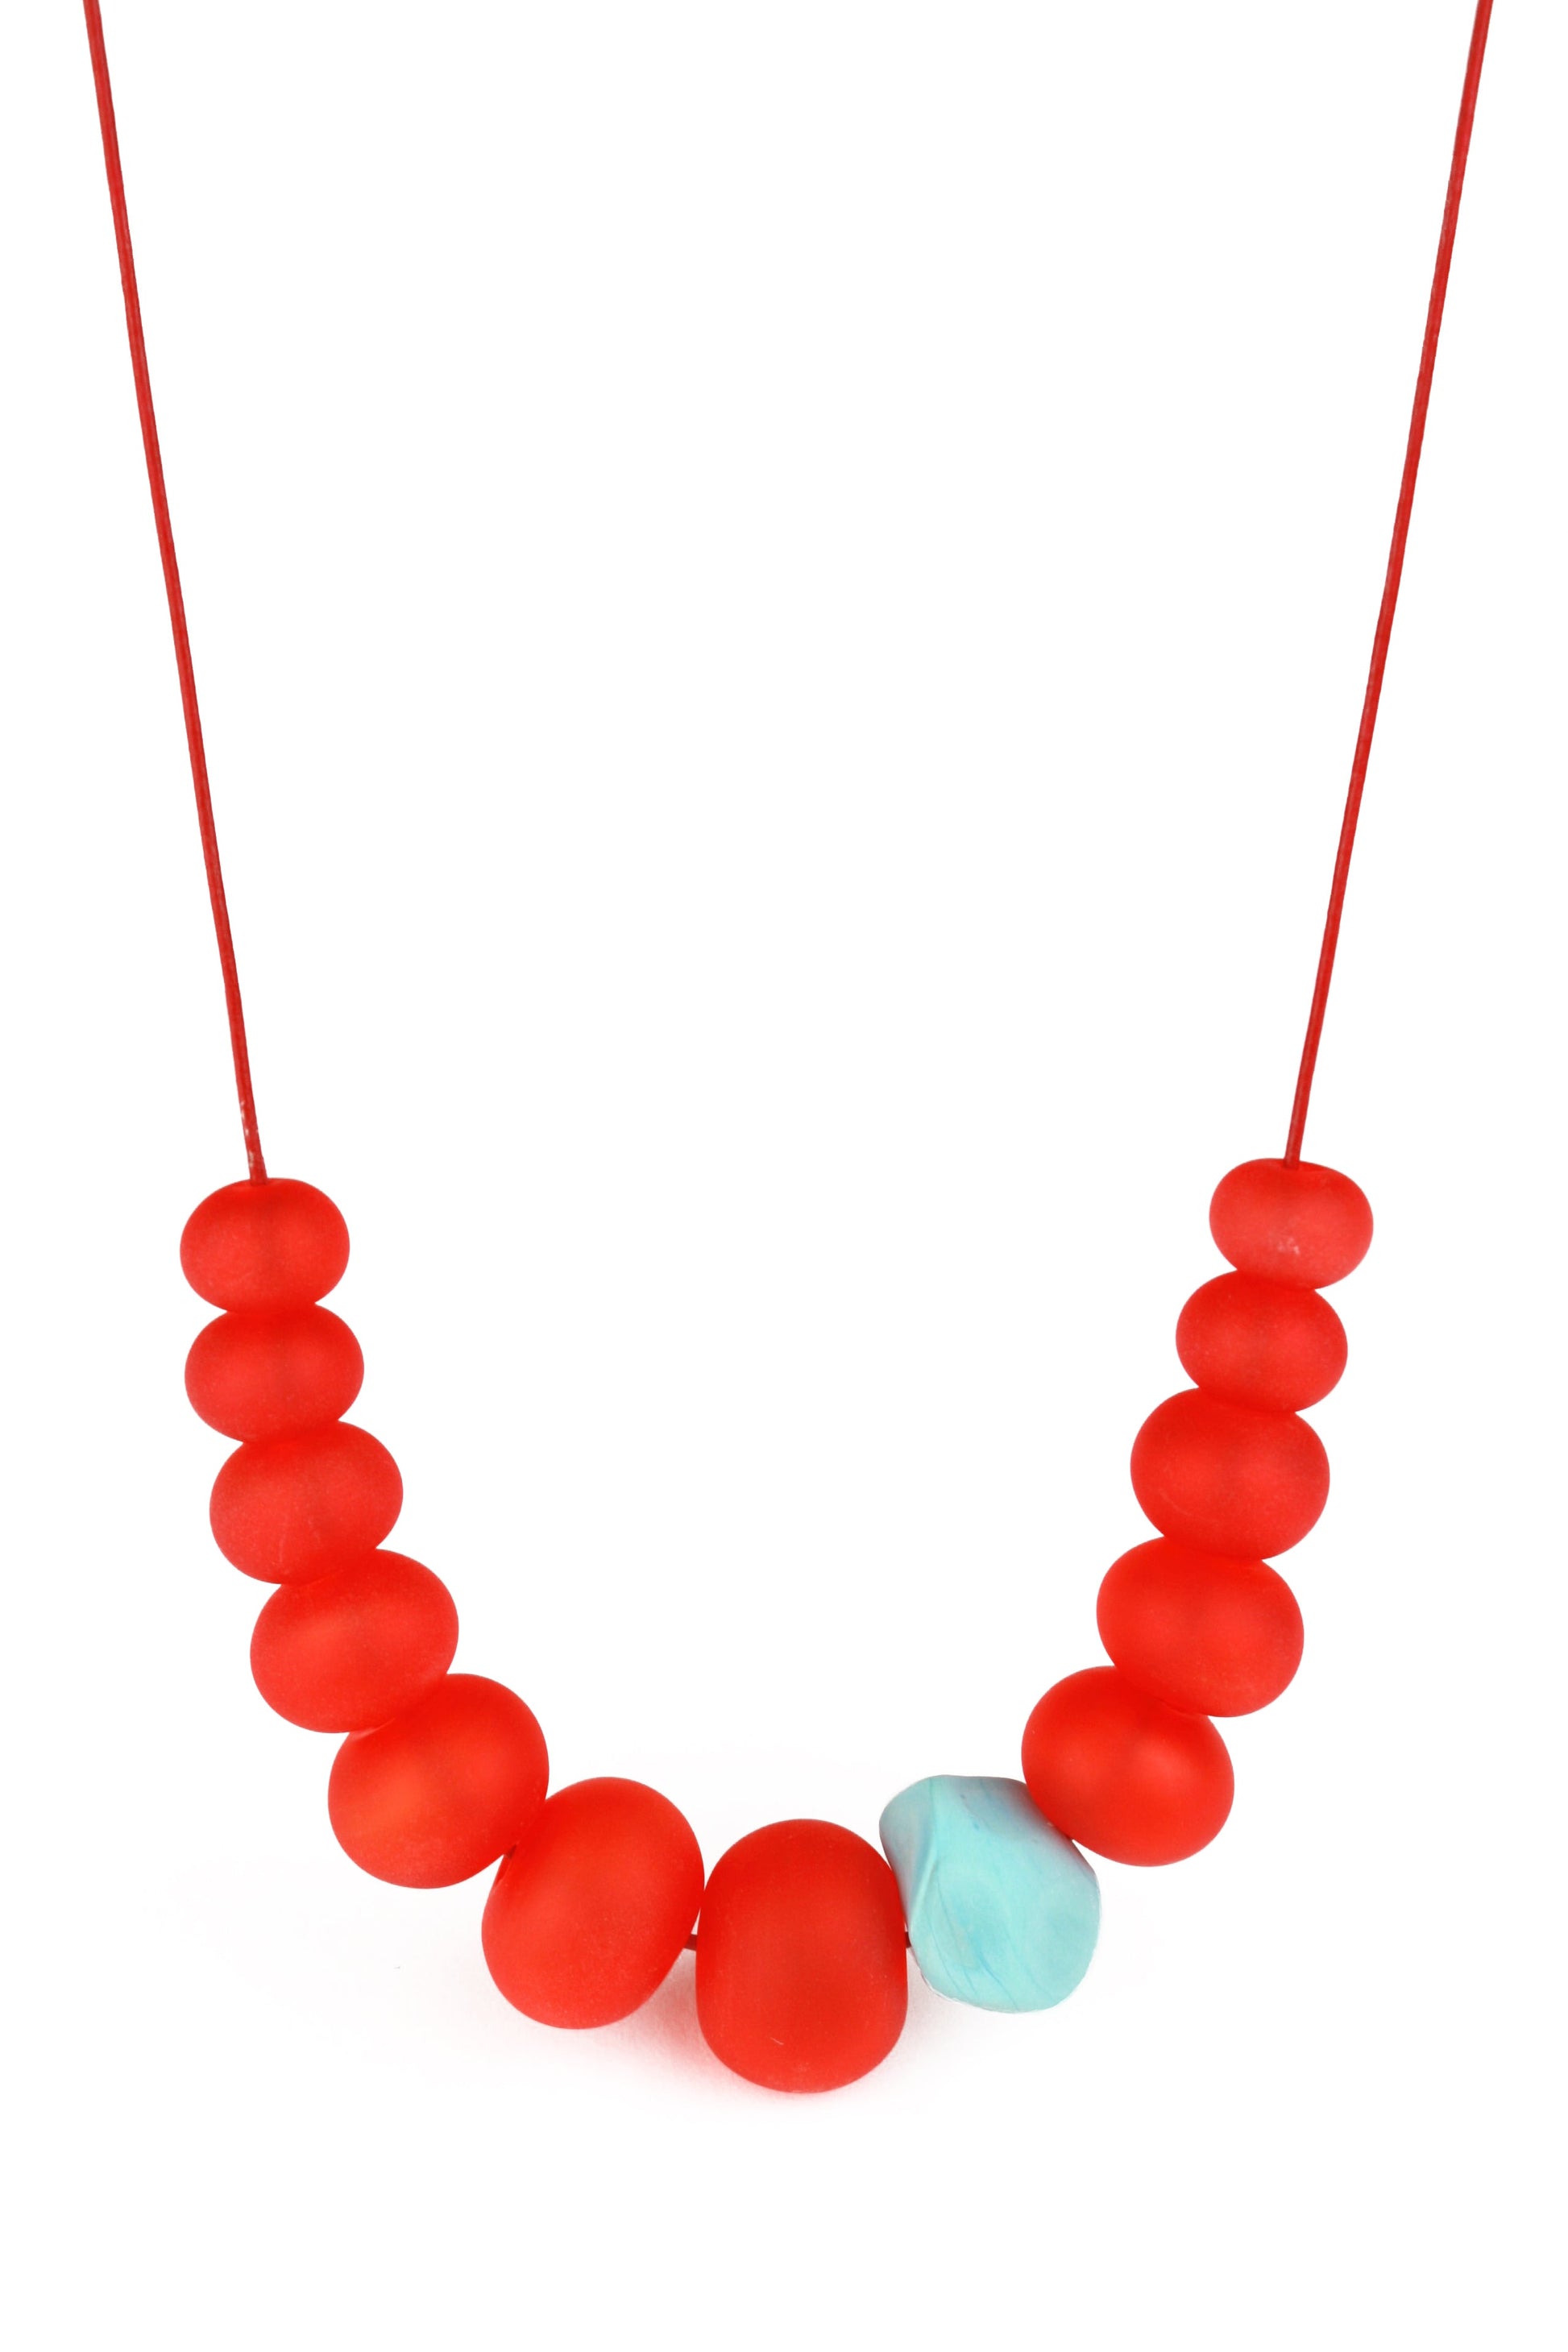 Necklace of hand blown and sandblasted hollow beads in velvety cherry red glass paired with a turquoise glass nugget bead and strung on adjustable leather